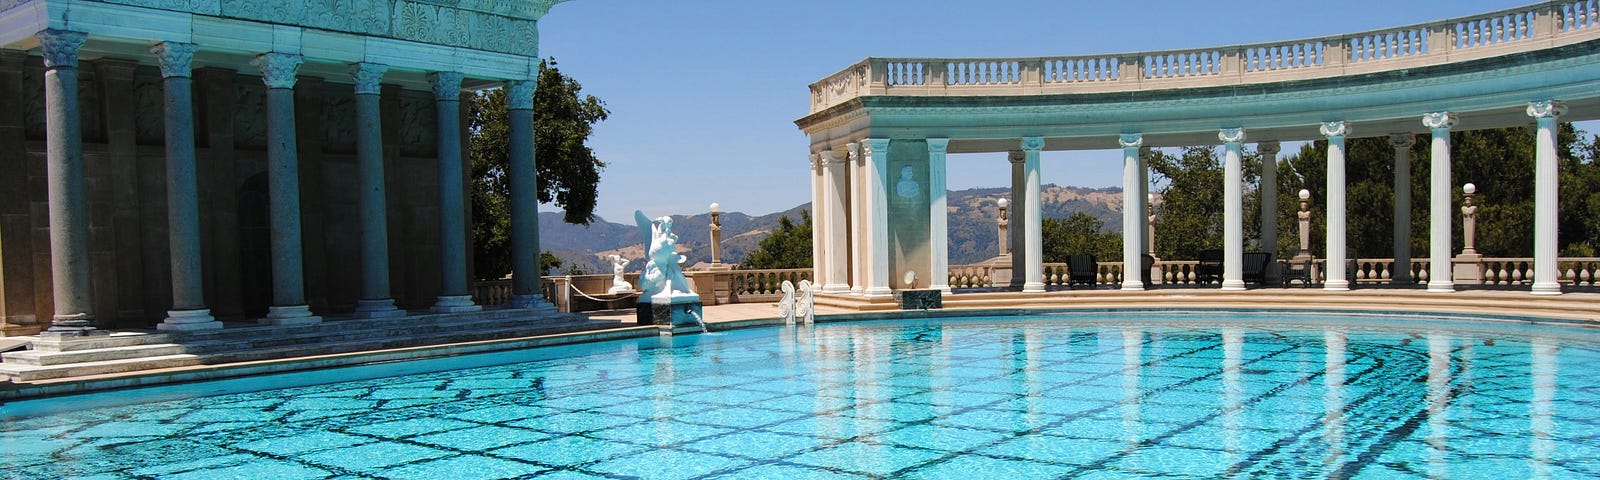 Image showing a large palace with marble columns and a massive swimming pool.